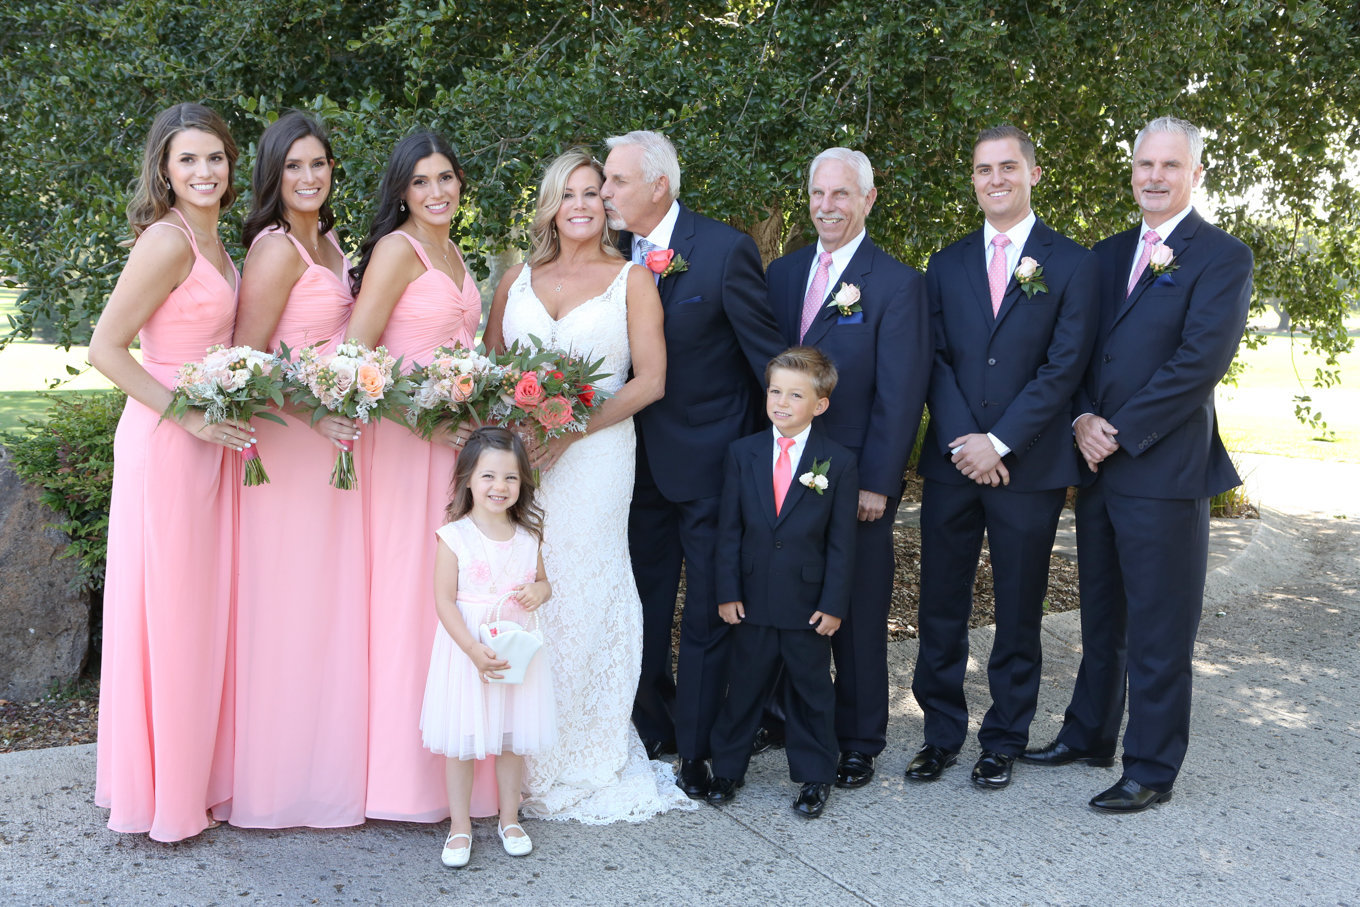 Gorgeous bridal party at Los Altos Golf and Country Club - such a beautiful Summer wedding!